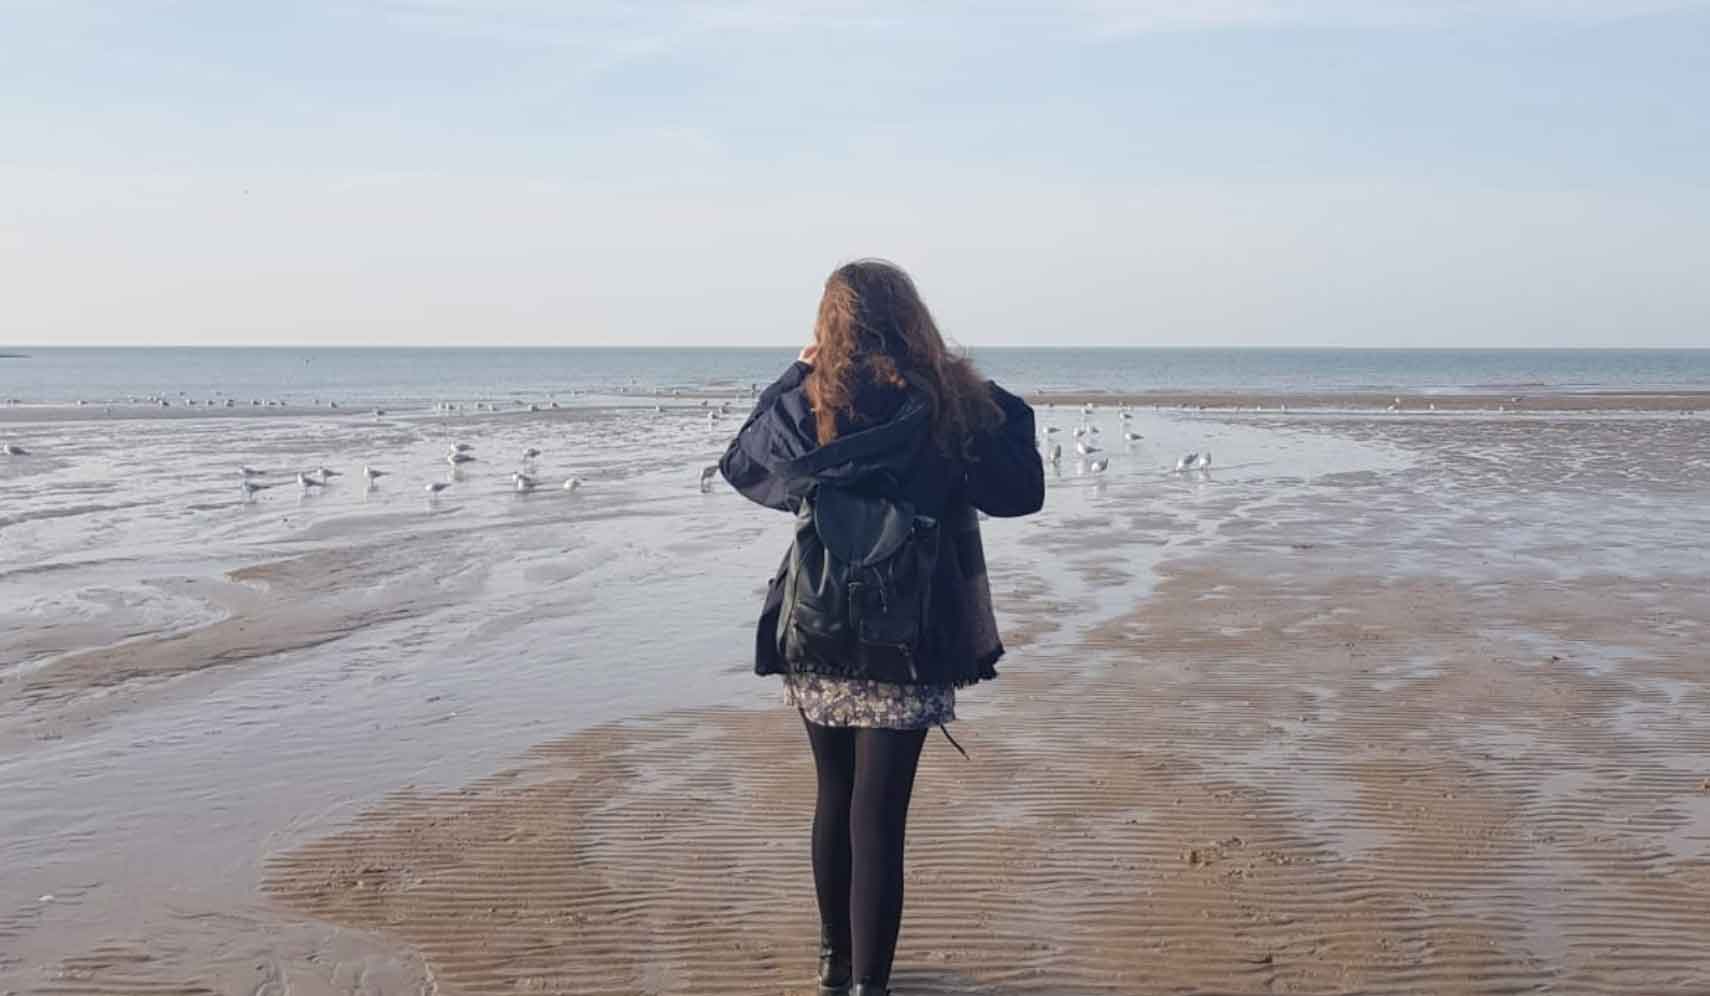 Student walking on a beach